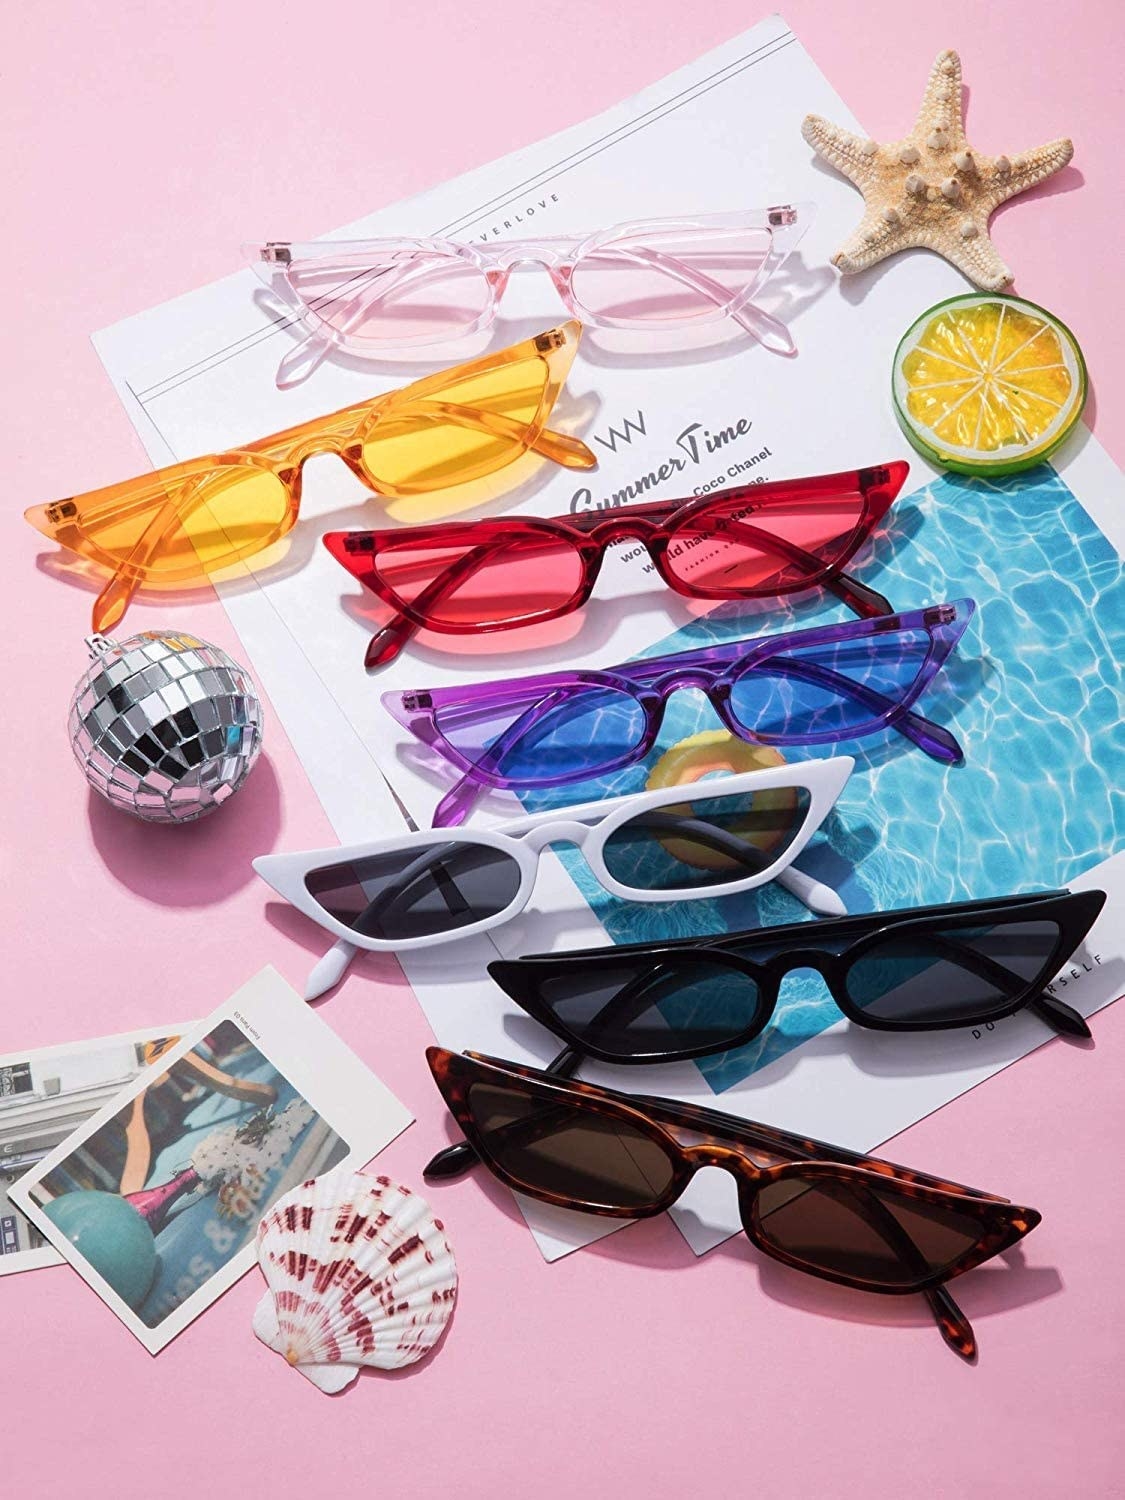 All the pairs of sunglasses laid out and surrounded by polaroids and accessories